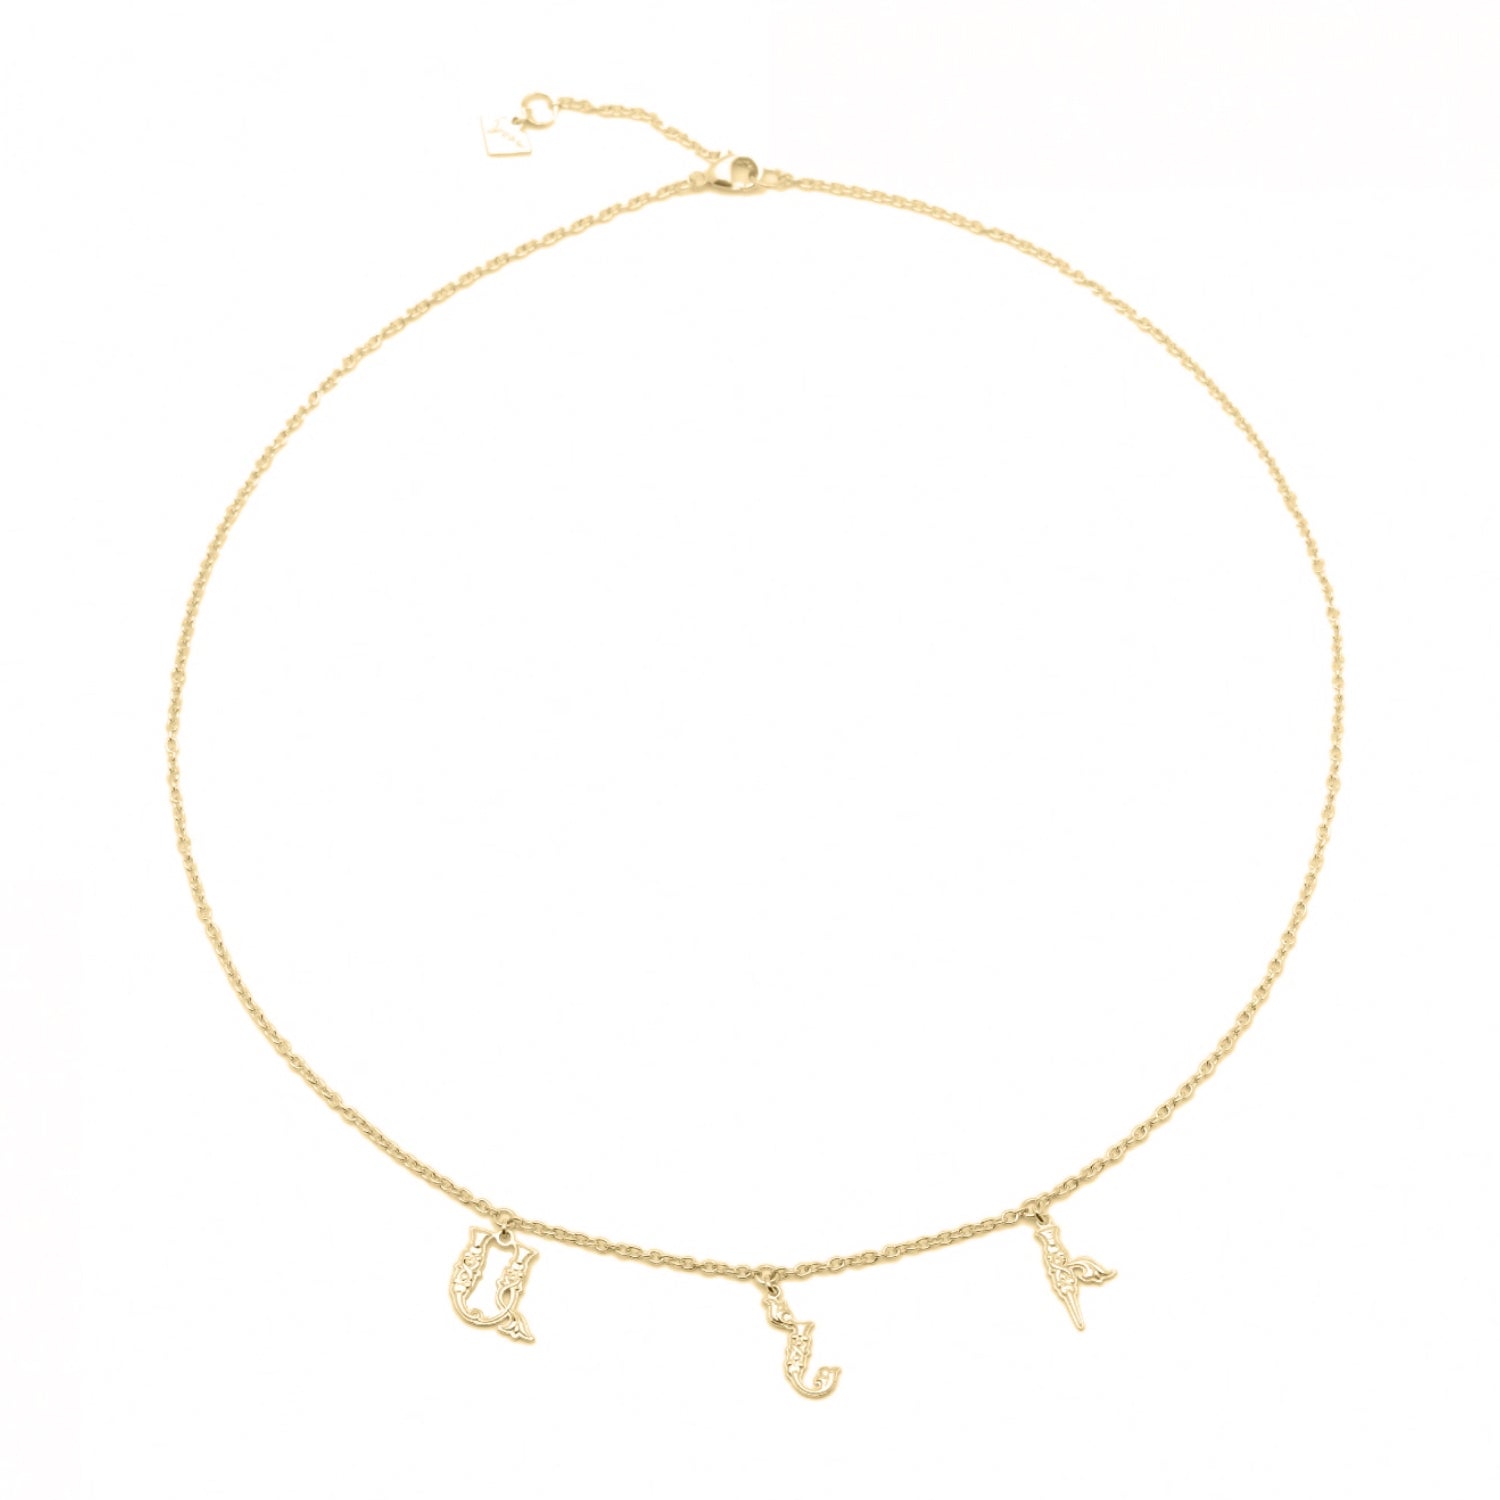 Armenian Spaced Three-Letter Name Necklace in Yellow Gold